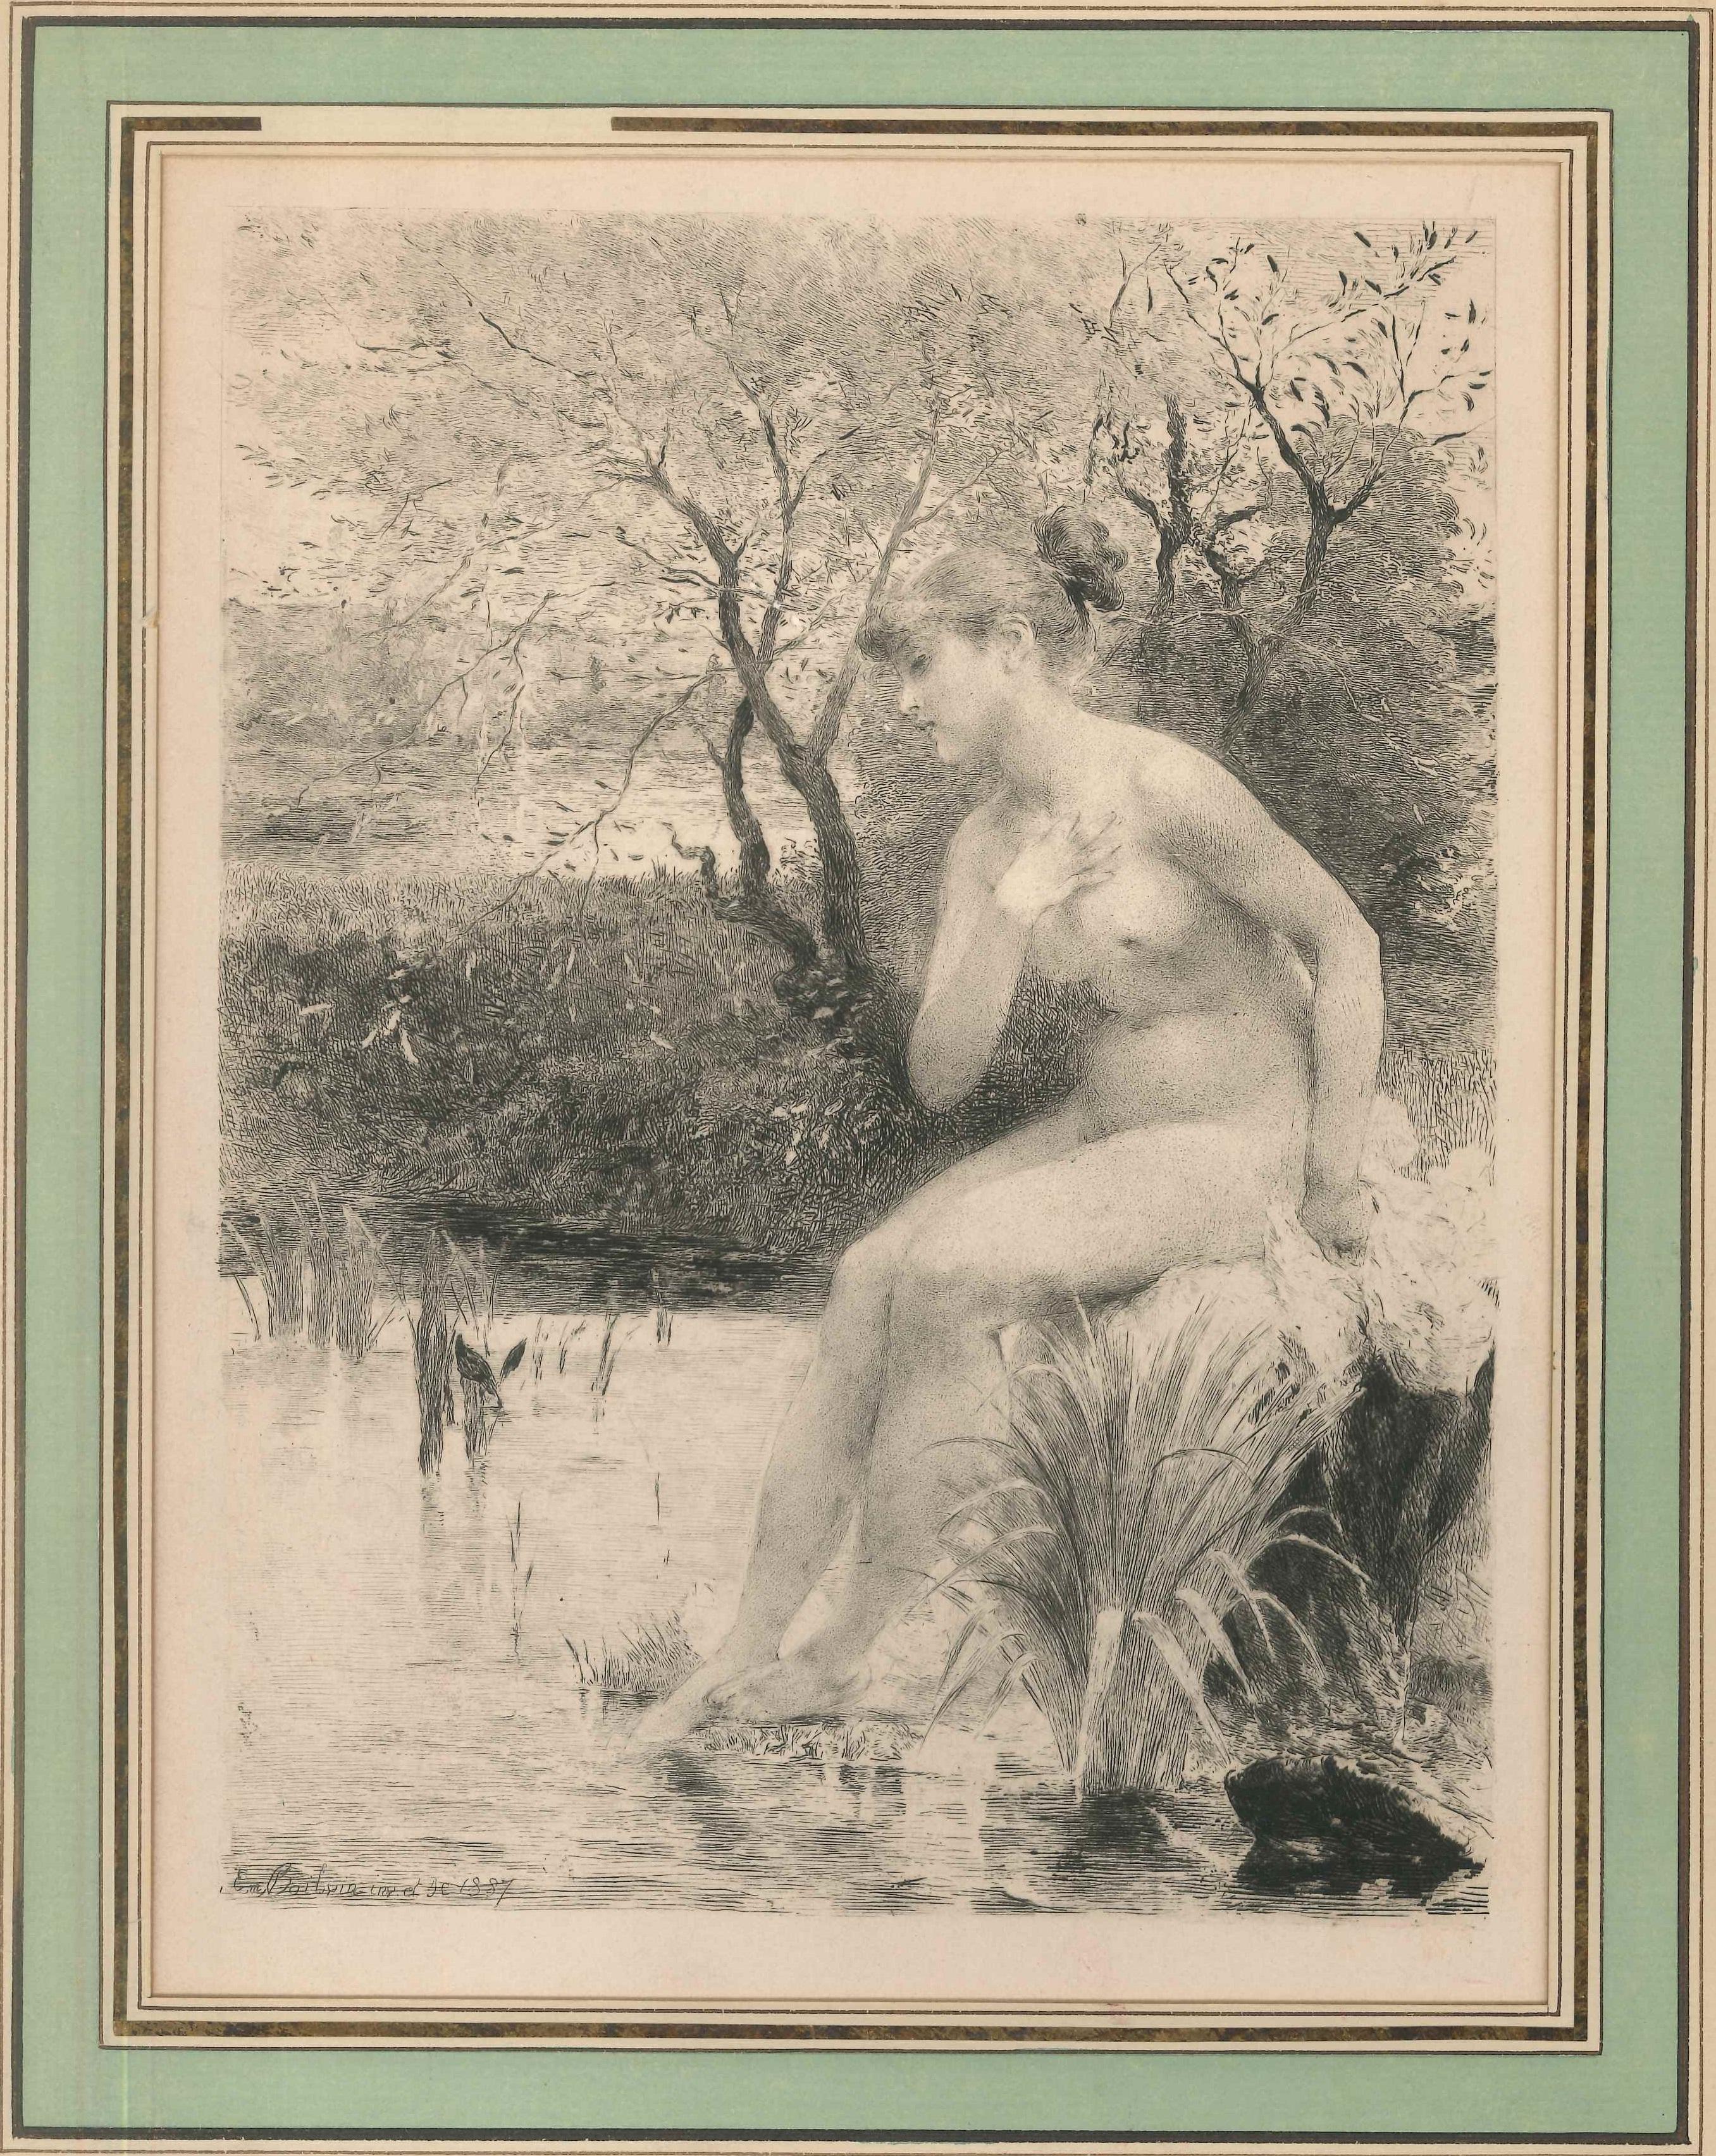 Bagneuse is an original artwork realized by Émile Boilvin in 1887. Original Etching on paper. Passepartout included (33 x 26.5).

Signed and titled on plate on the lower left margin. 

The plate is in very good conditions. A loss of color on the